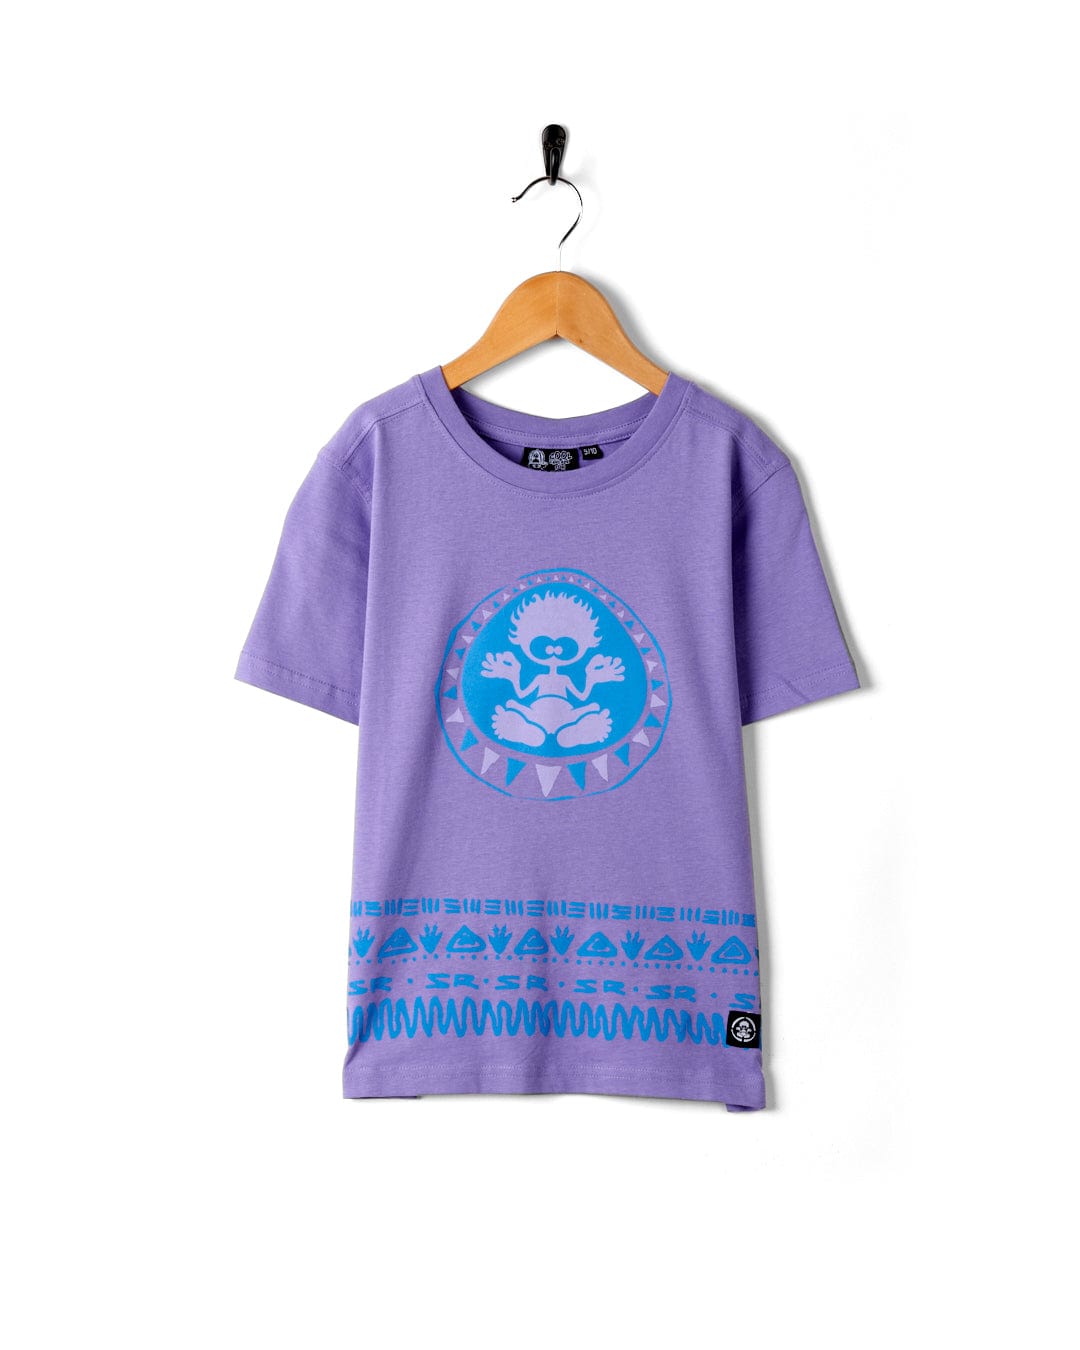 Back in the Day - Boys Short Sleeve T-Shirt - Purple, Purple / 7-8 Years